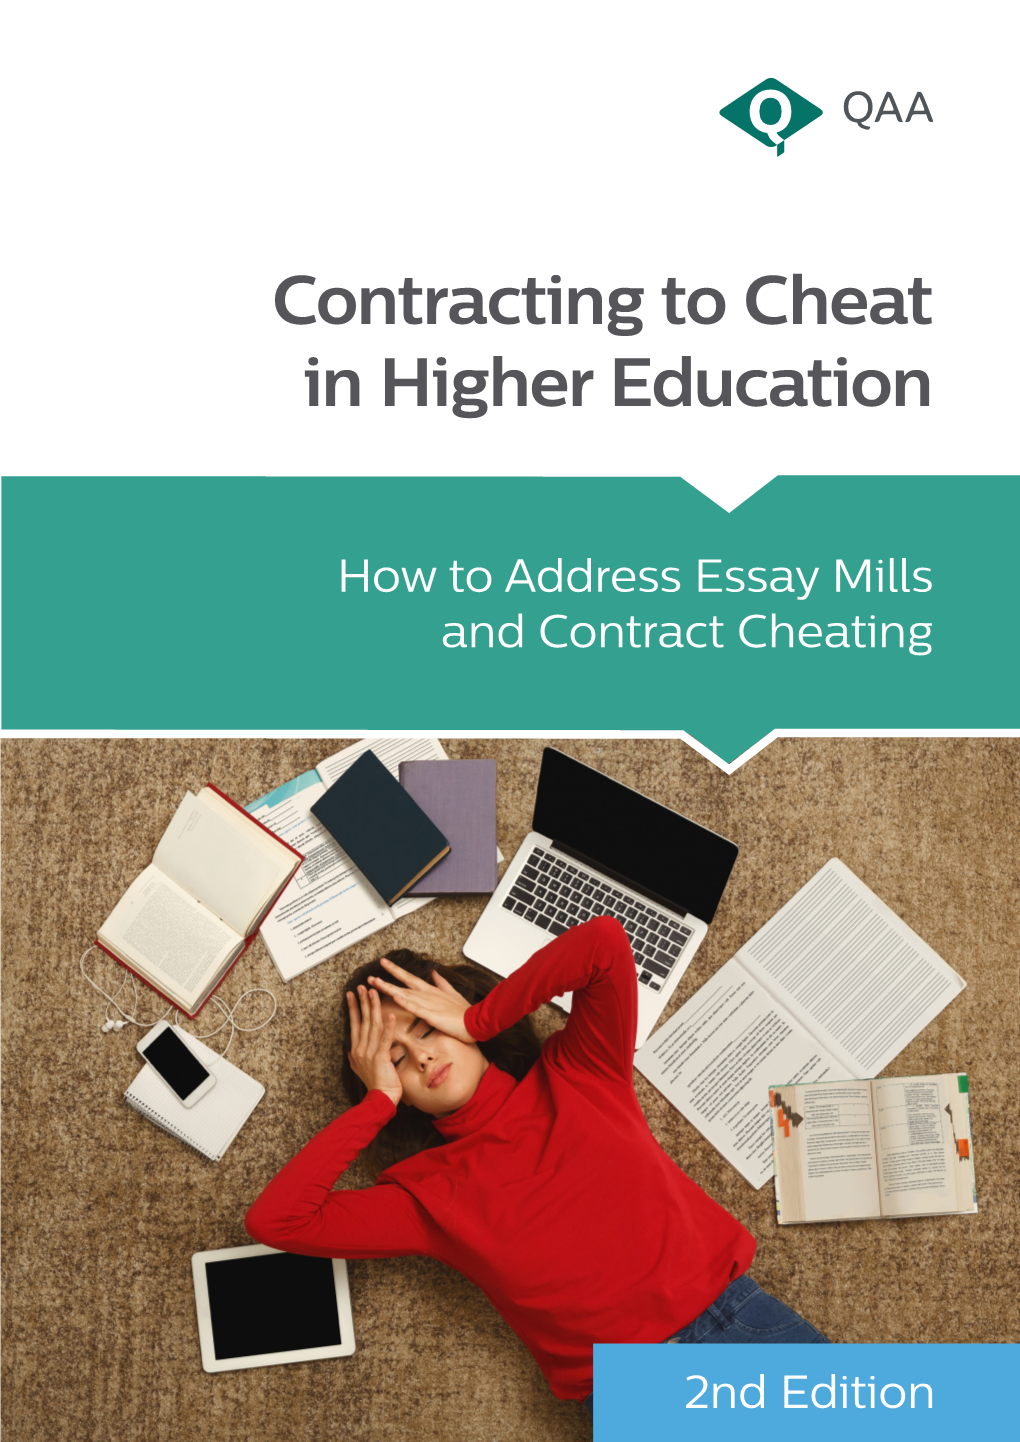 Contracting to Cheat in Higher Education Guidance